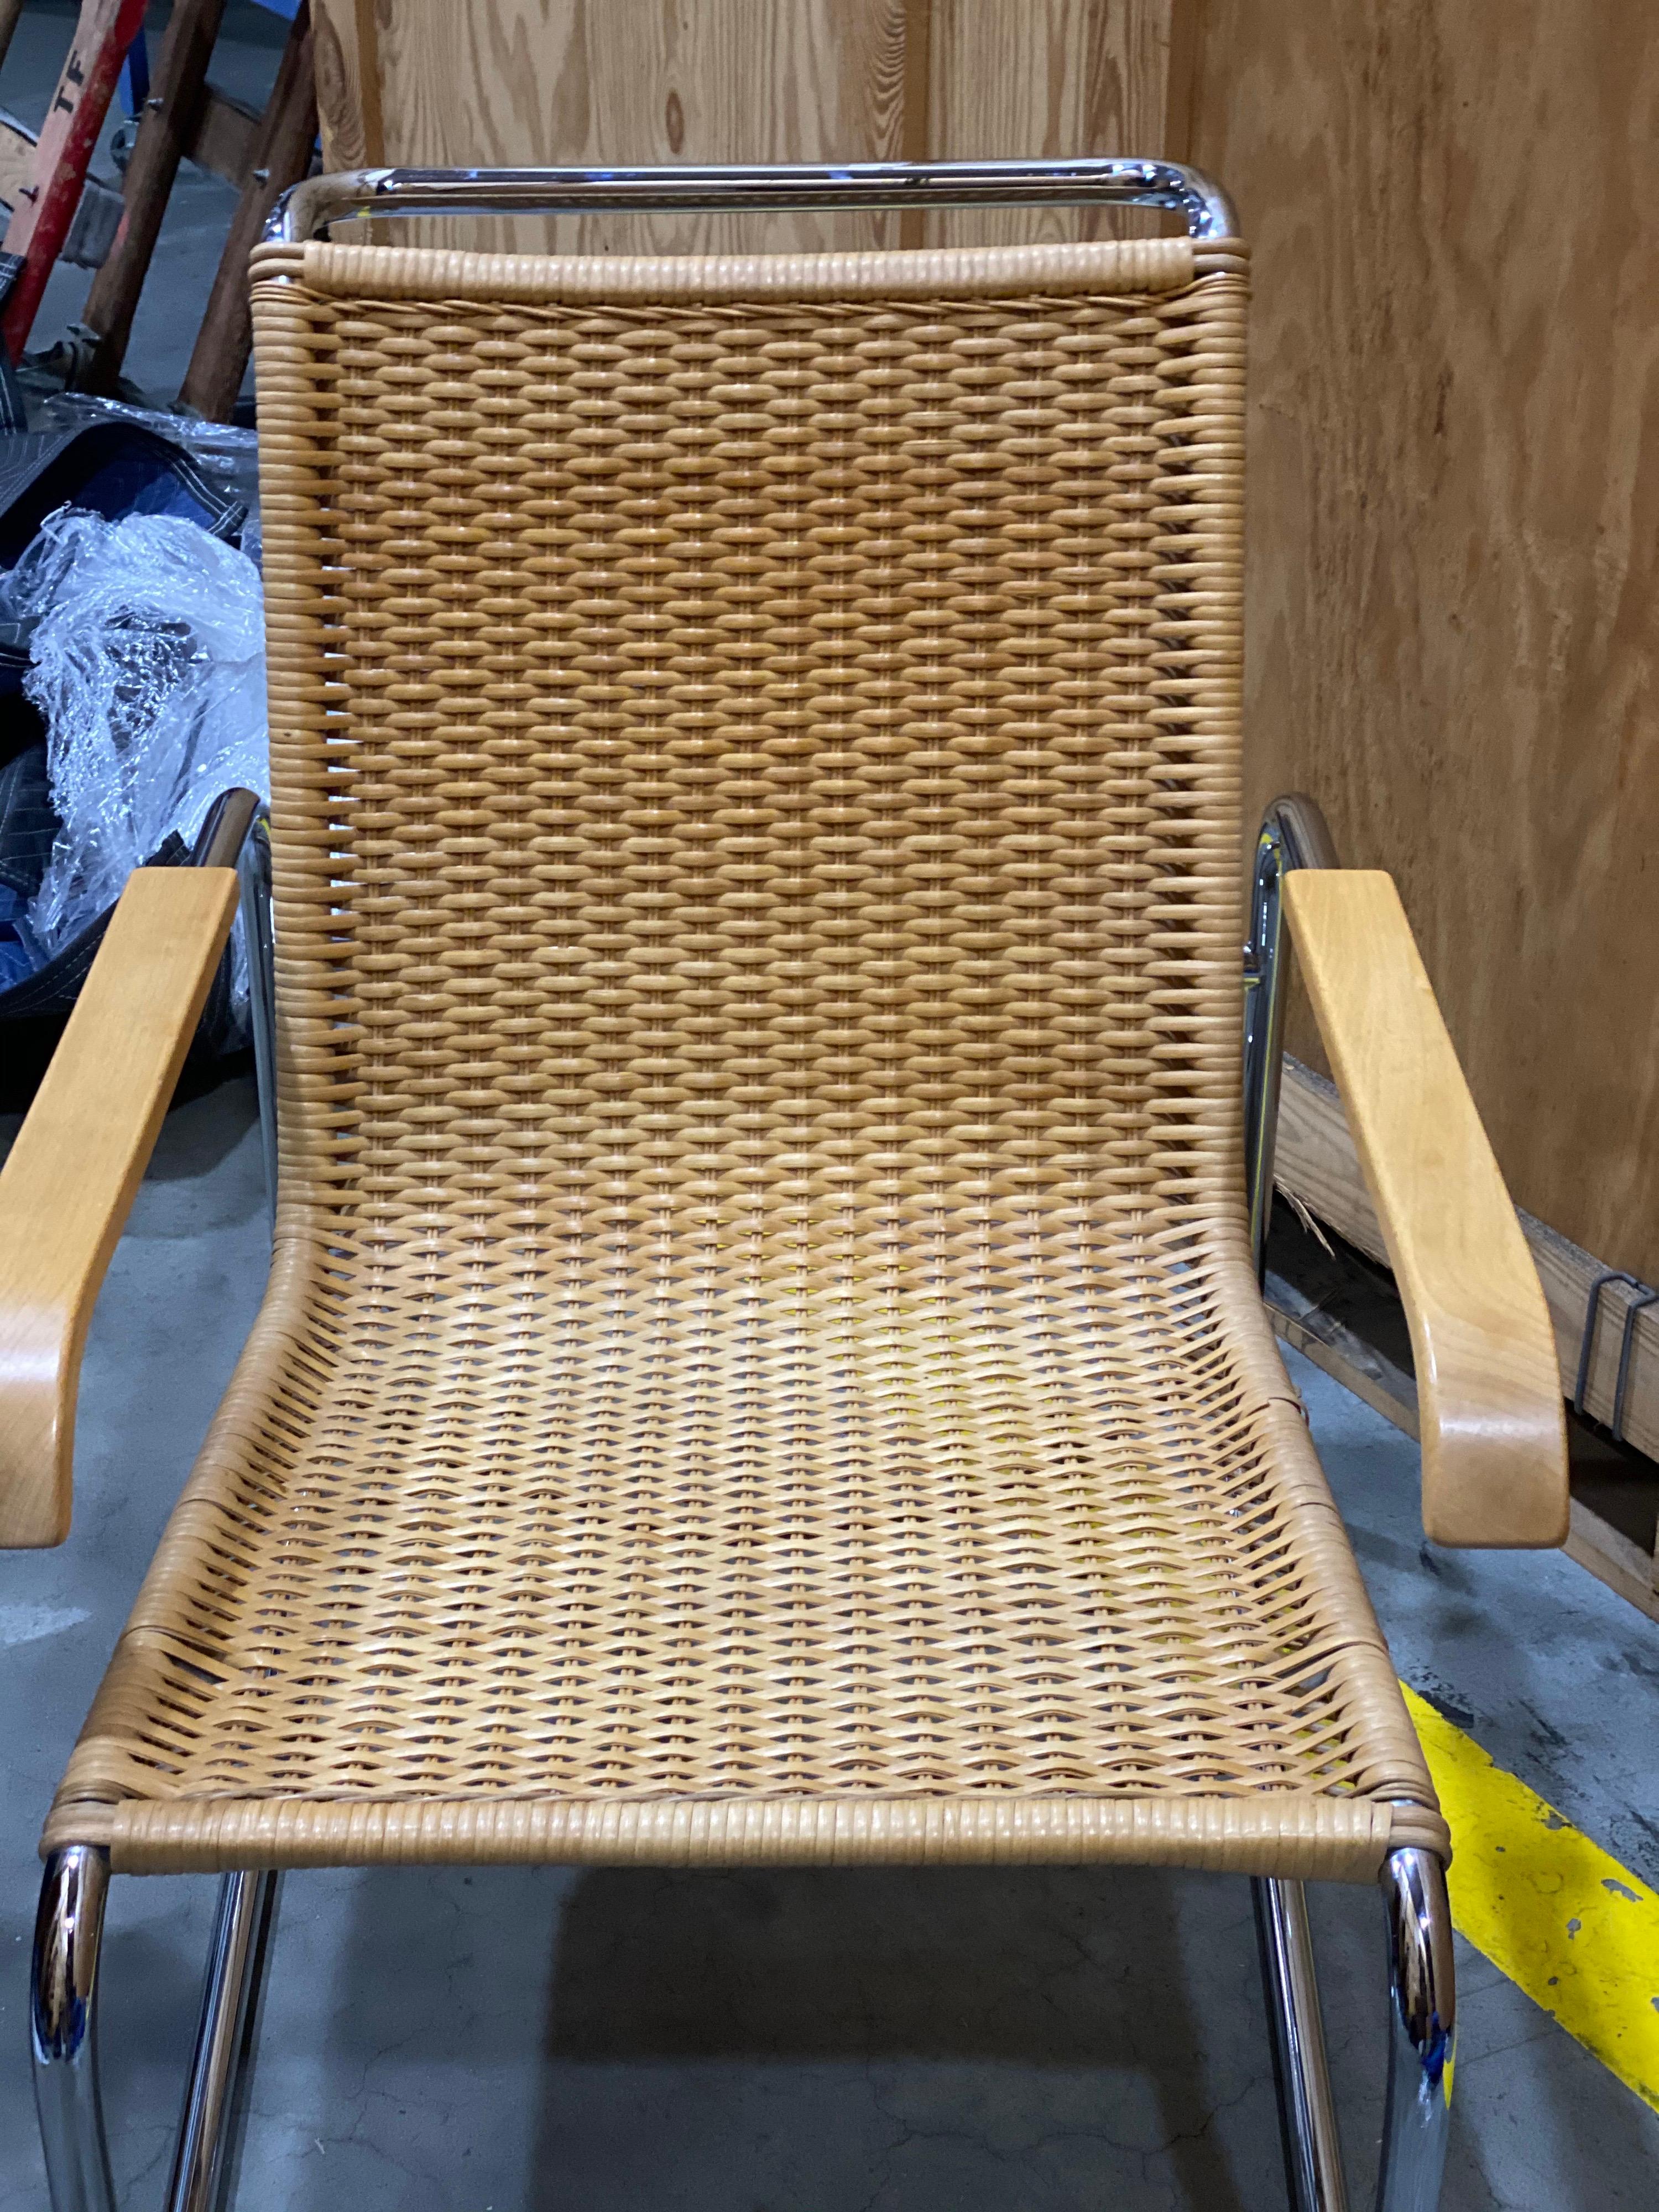 Chromed metal and rattan B35 lounge chair with wooden armrests by Marcel Breuer for Thonet., Re-edition by Thonet 1970s. Mohair cushions made for chair. Good overall condition. Water mark on arm. One area loose on rattan.

Measures: 31.25